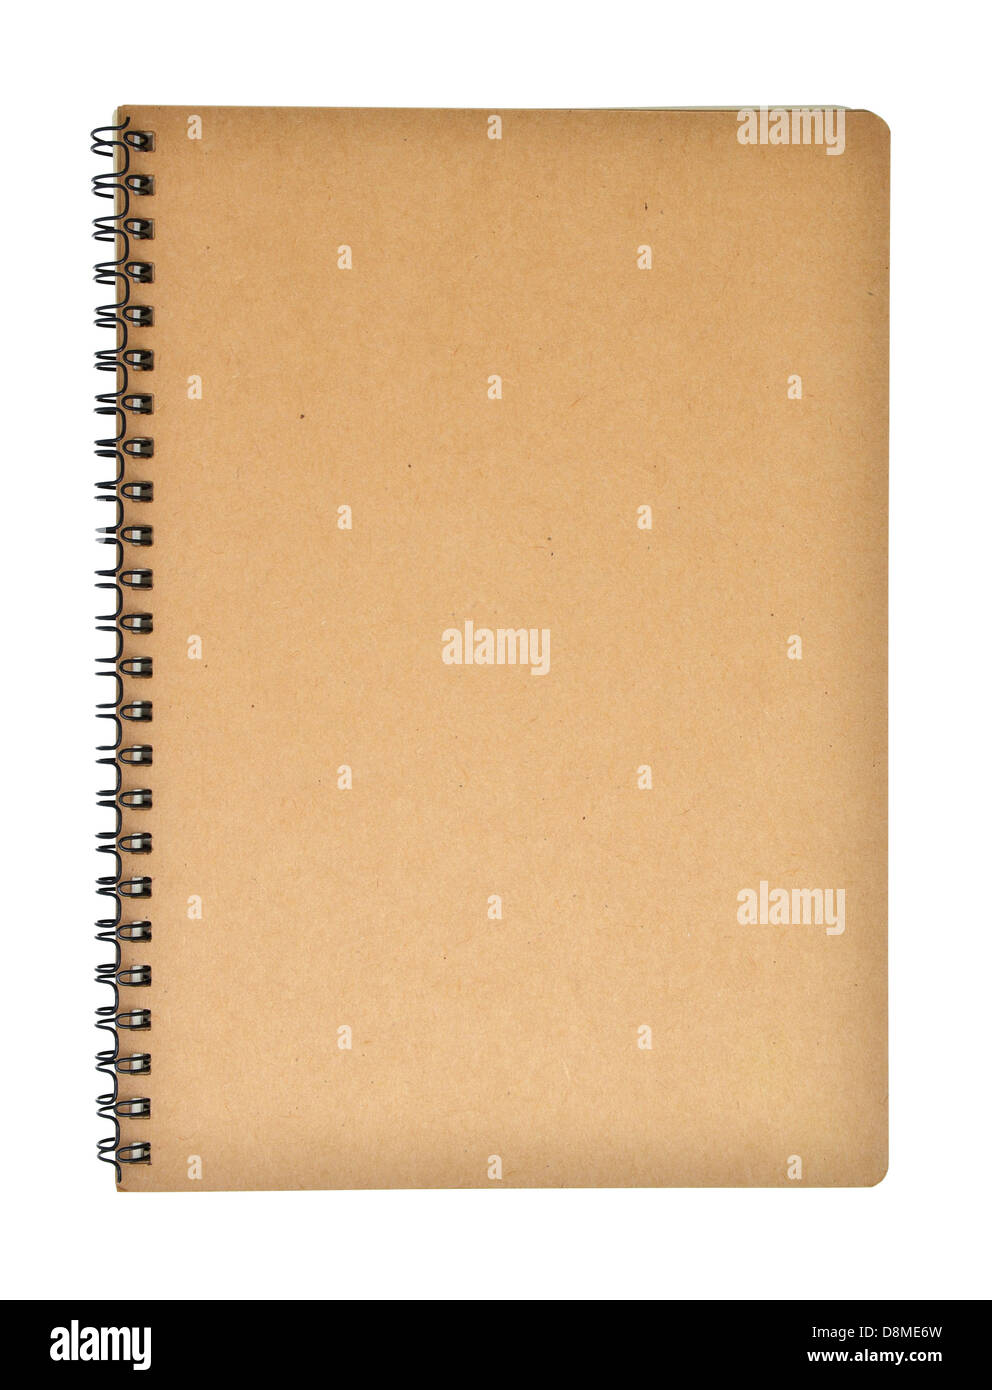 Notebook with clipping path Stock Photo